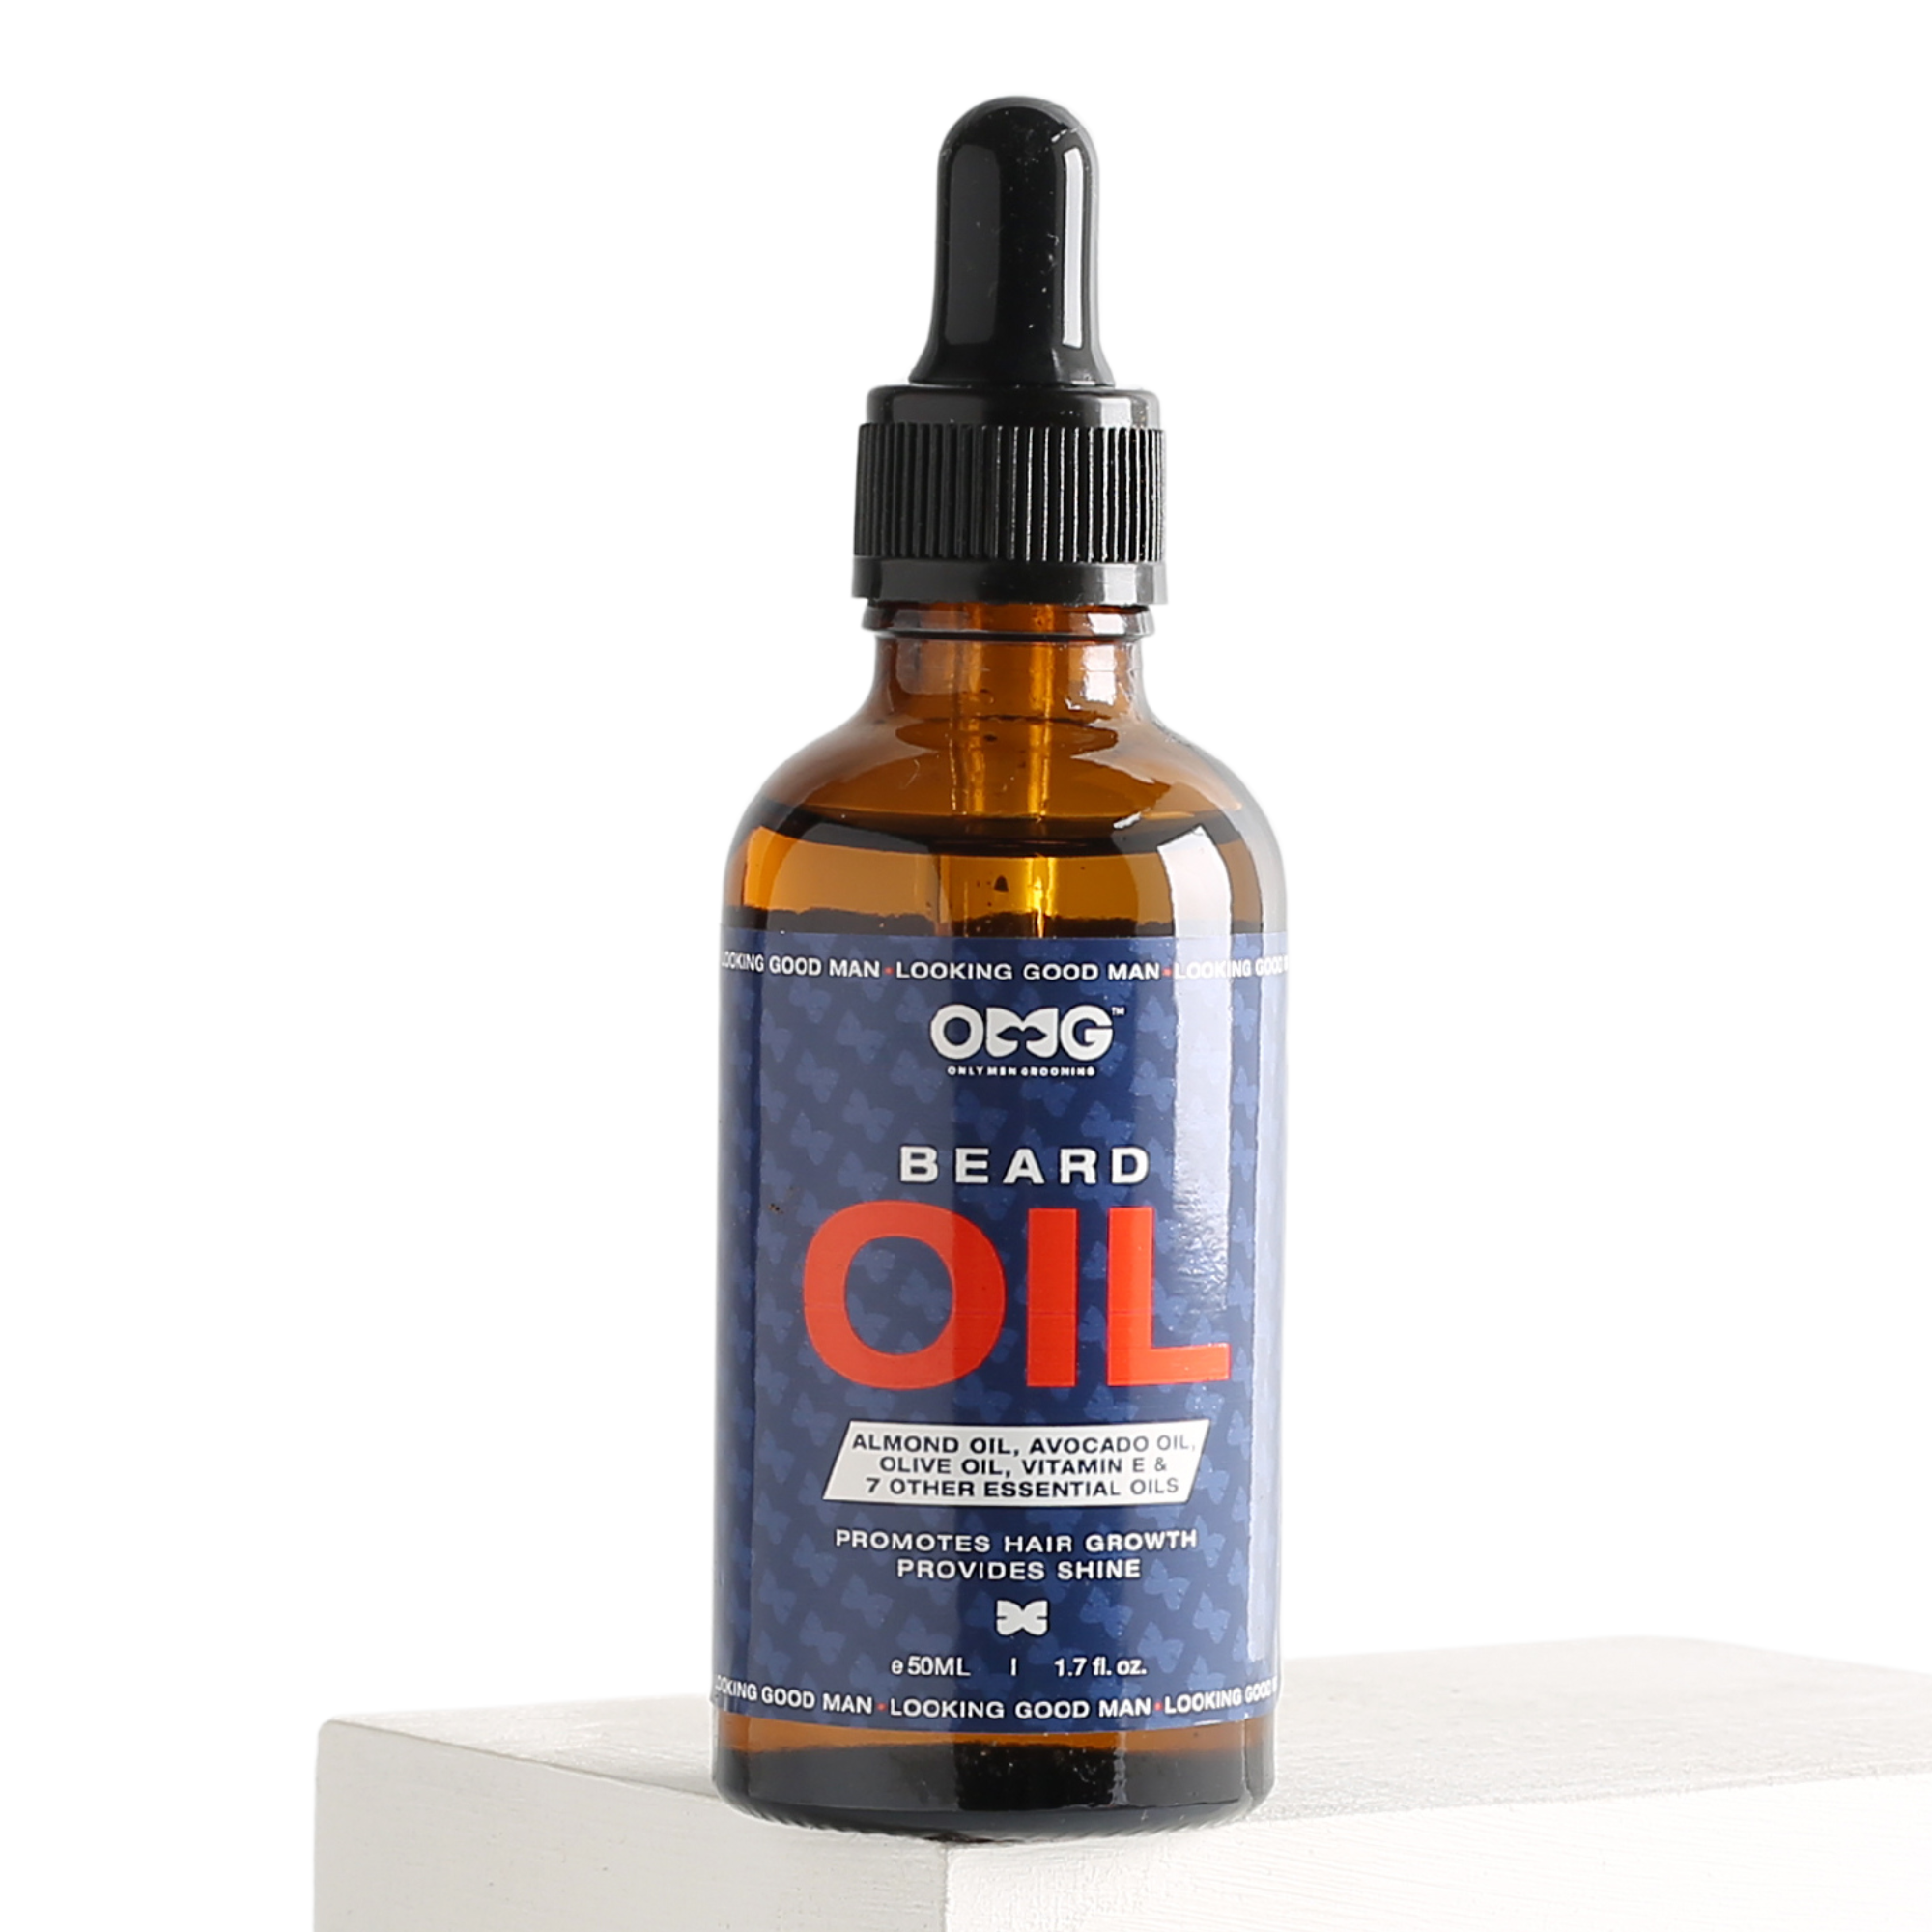 OMG BEARD OIL 50ML | PROMOTES BEARD HAIR GROWTH AND GIVES SHINE | ENRICHED WITH VITAMIN E AND 100% NATURAL INGREDIENTS | CONTAINS ALMOND OIL, AVOCADO OIL, OLIVE OIL